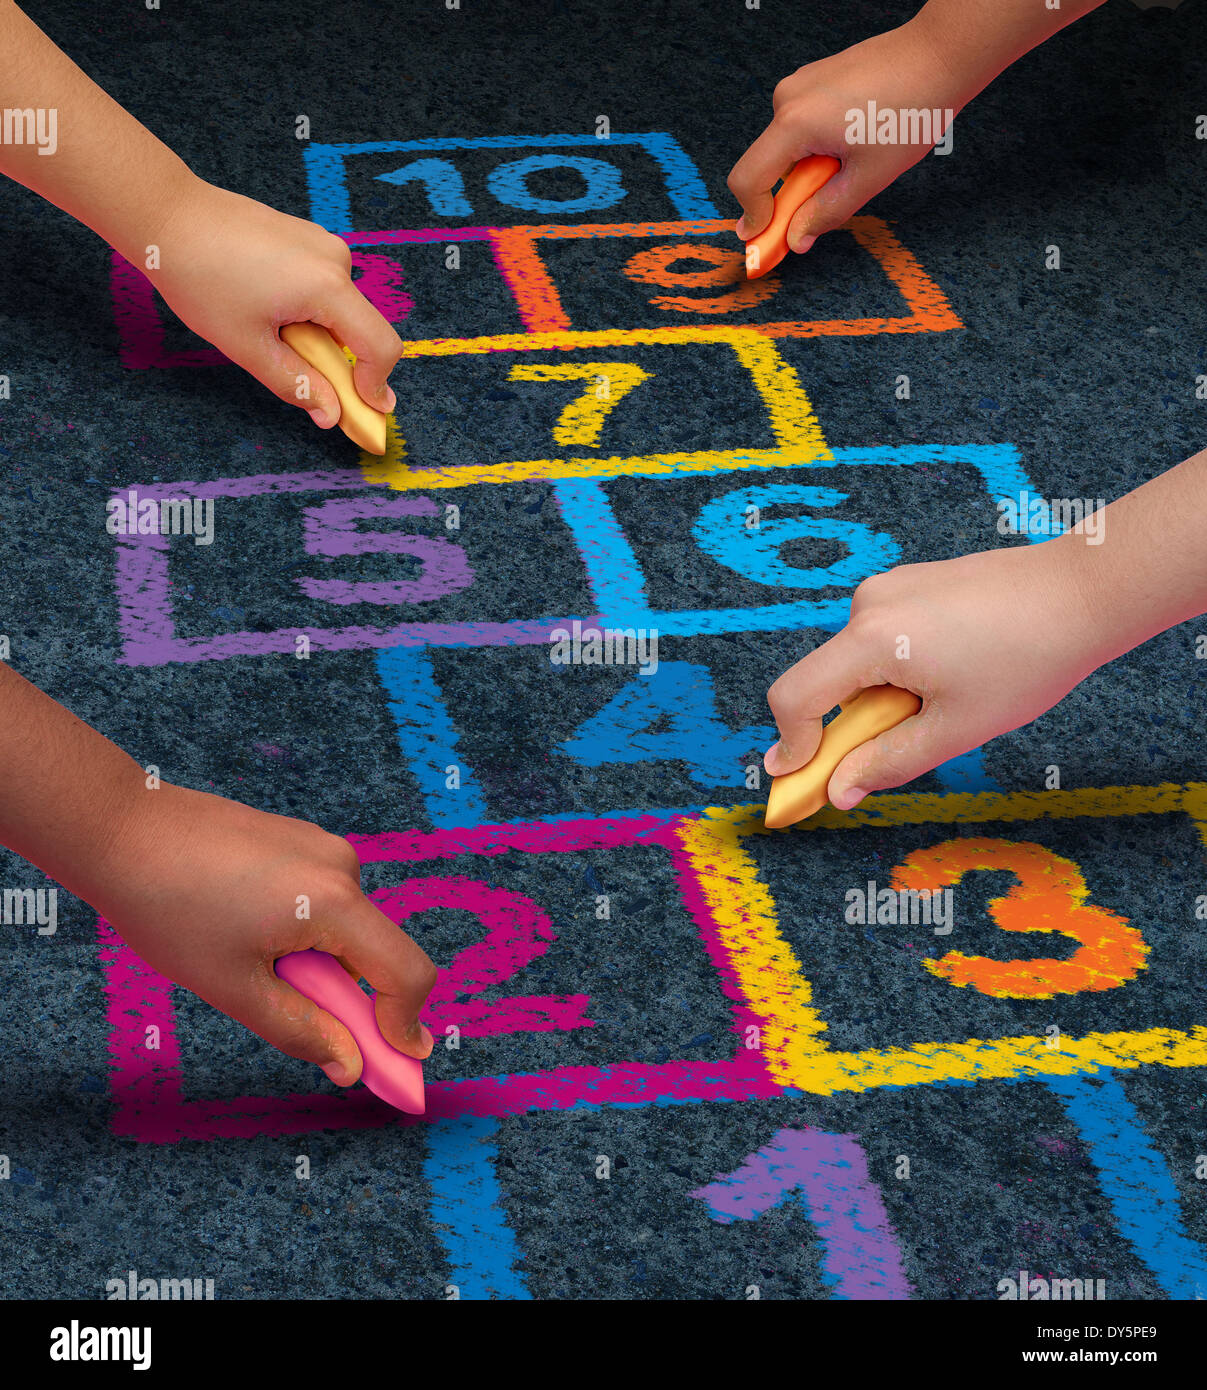 Community development education and children learning concept with a group of hands representing ethnic groups of young people holding chalk cooperating together as friends to draw a playground hopscotch game. Stock Photo